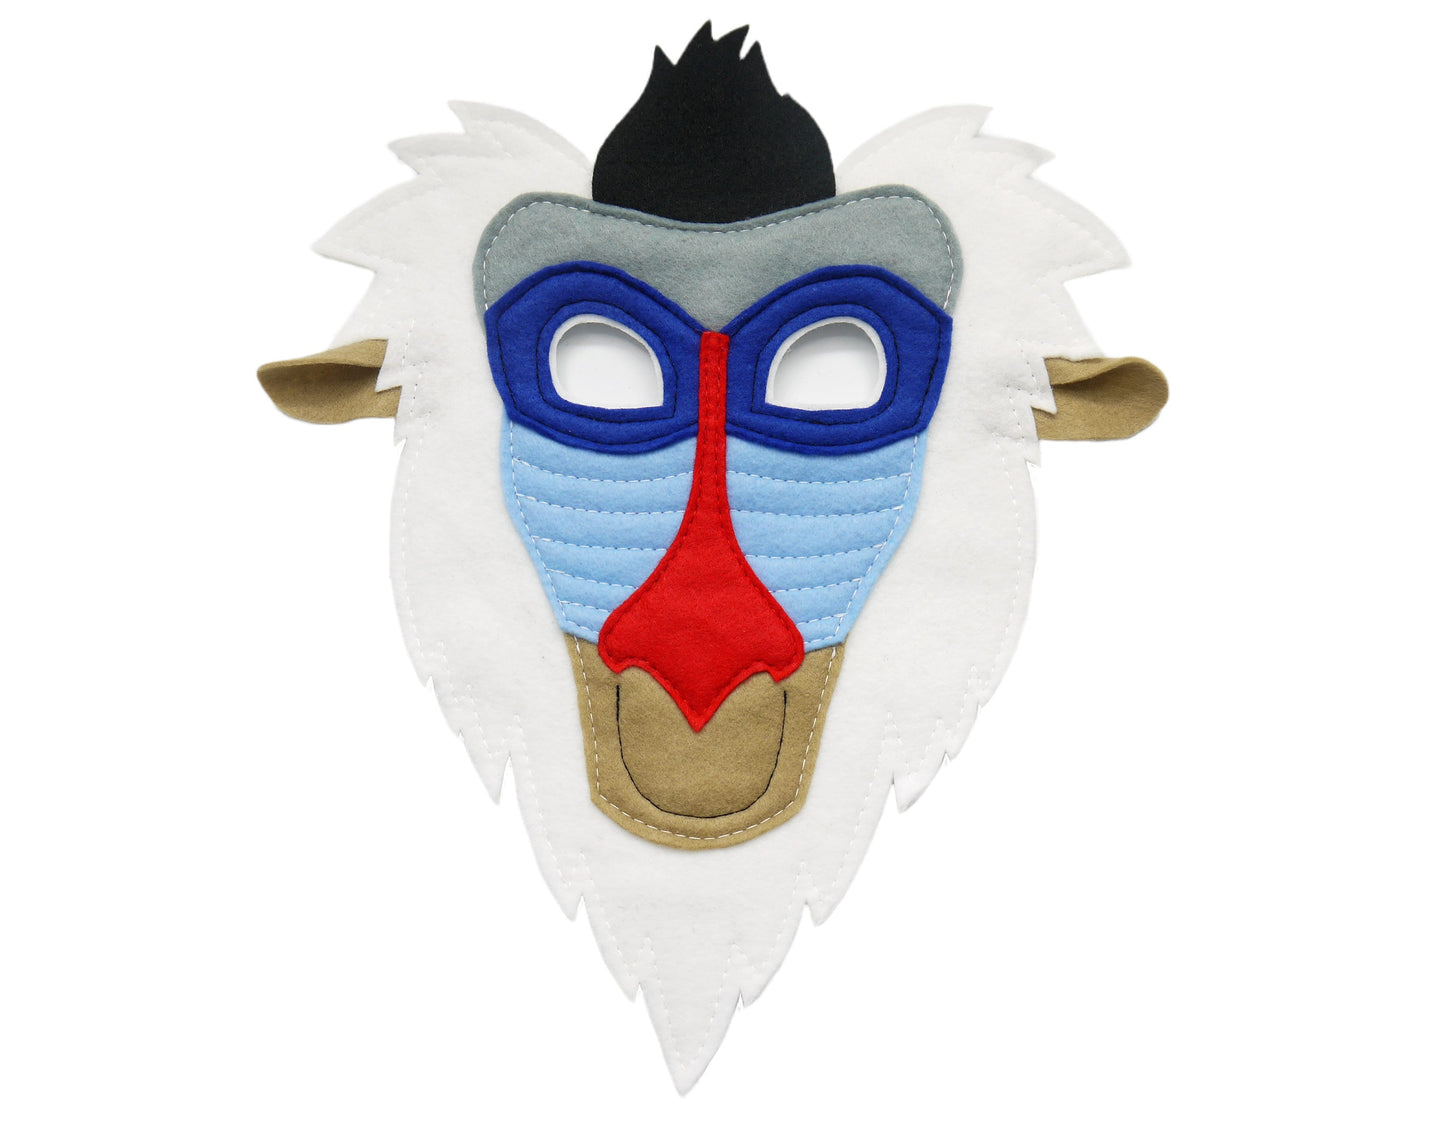 Monkey Mask Costume, Mandrill Book day, Child and adult size, cosplay, theatre, gift, headdress, men's woman's children's